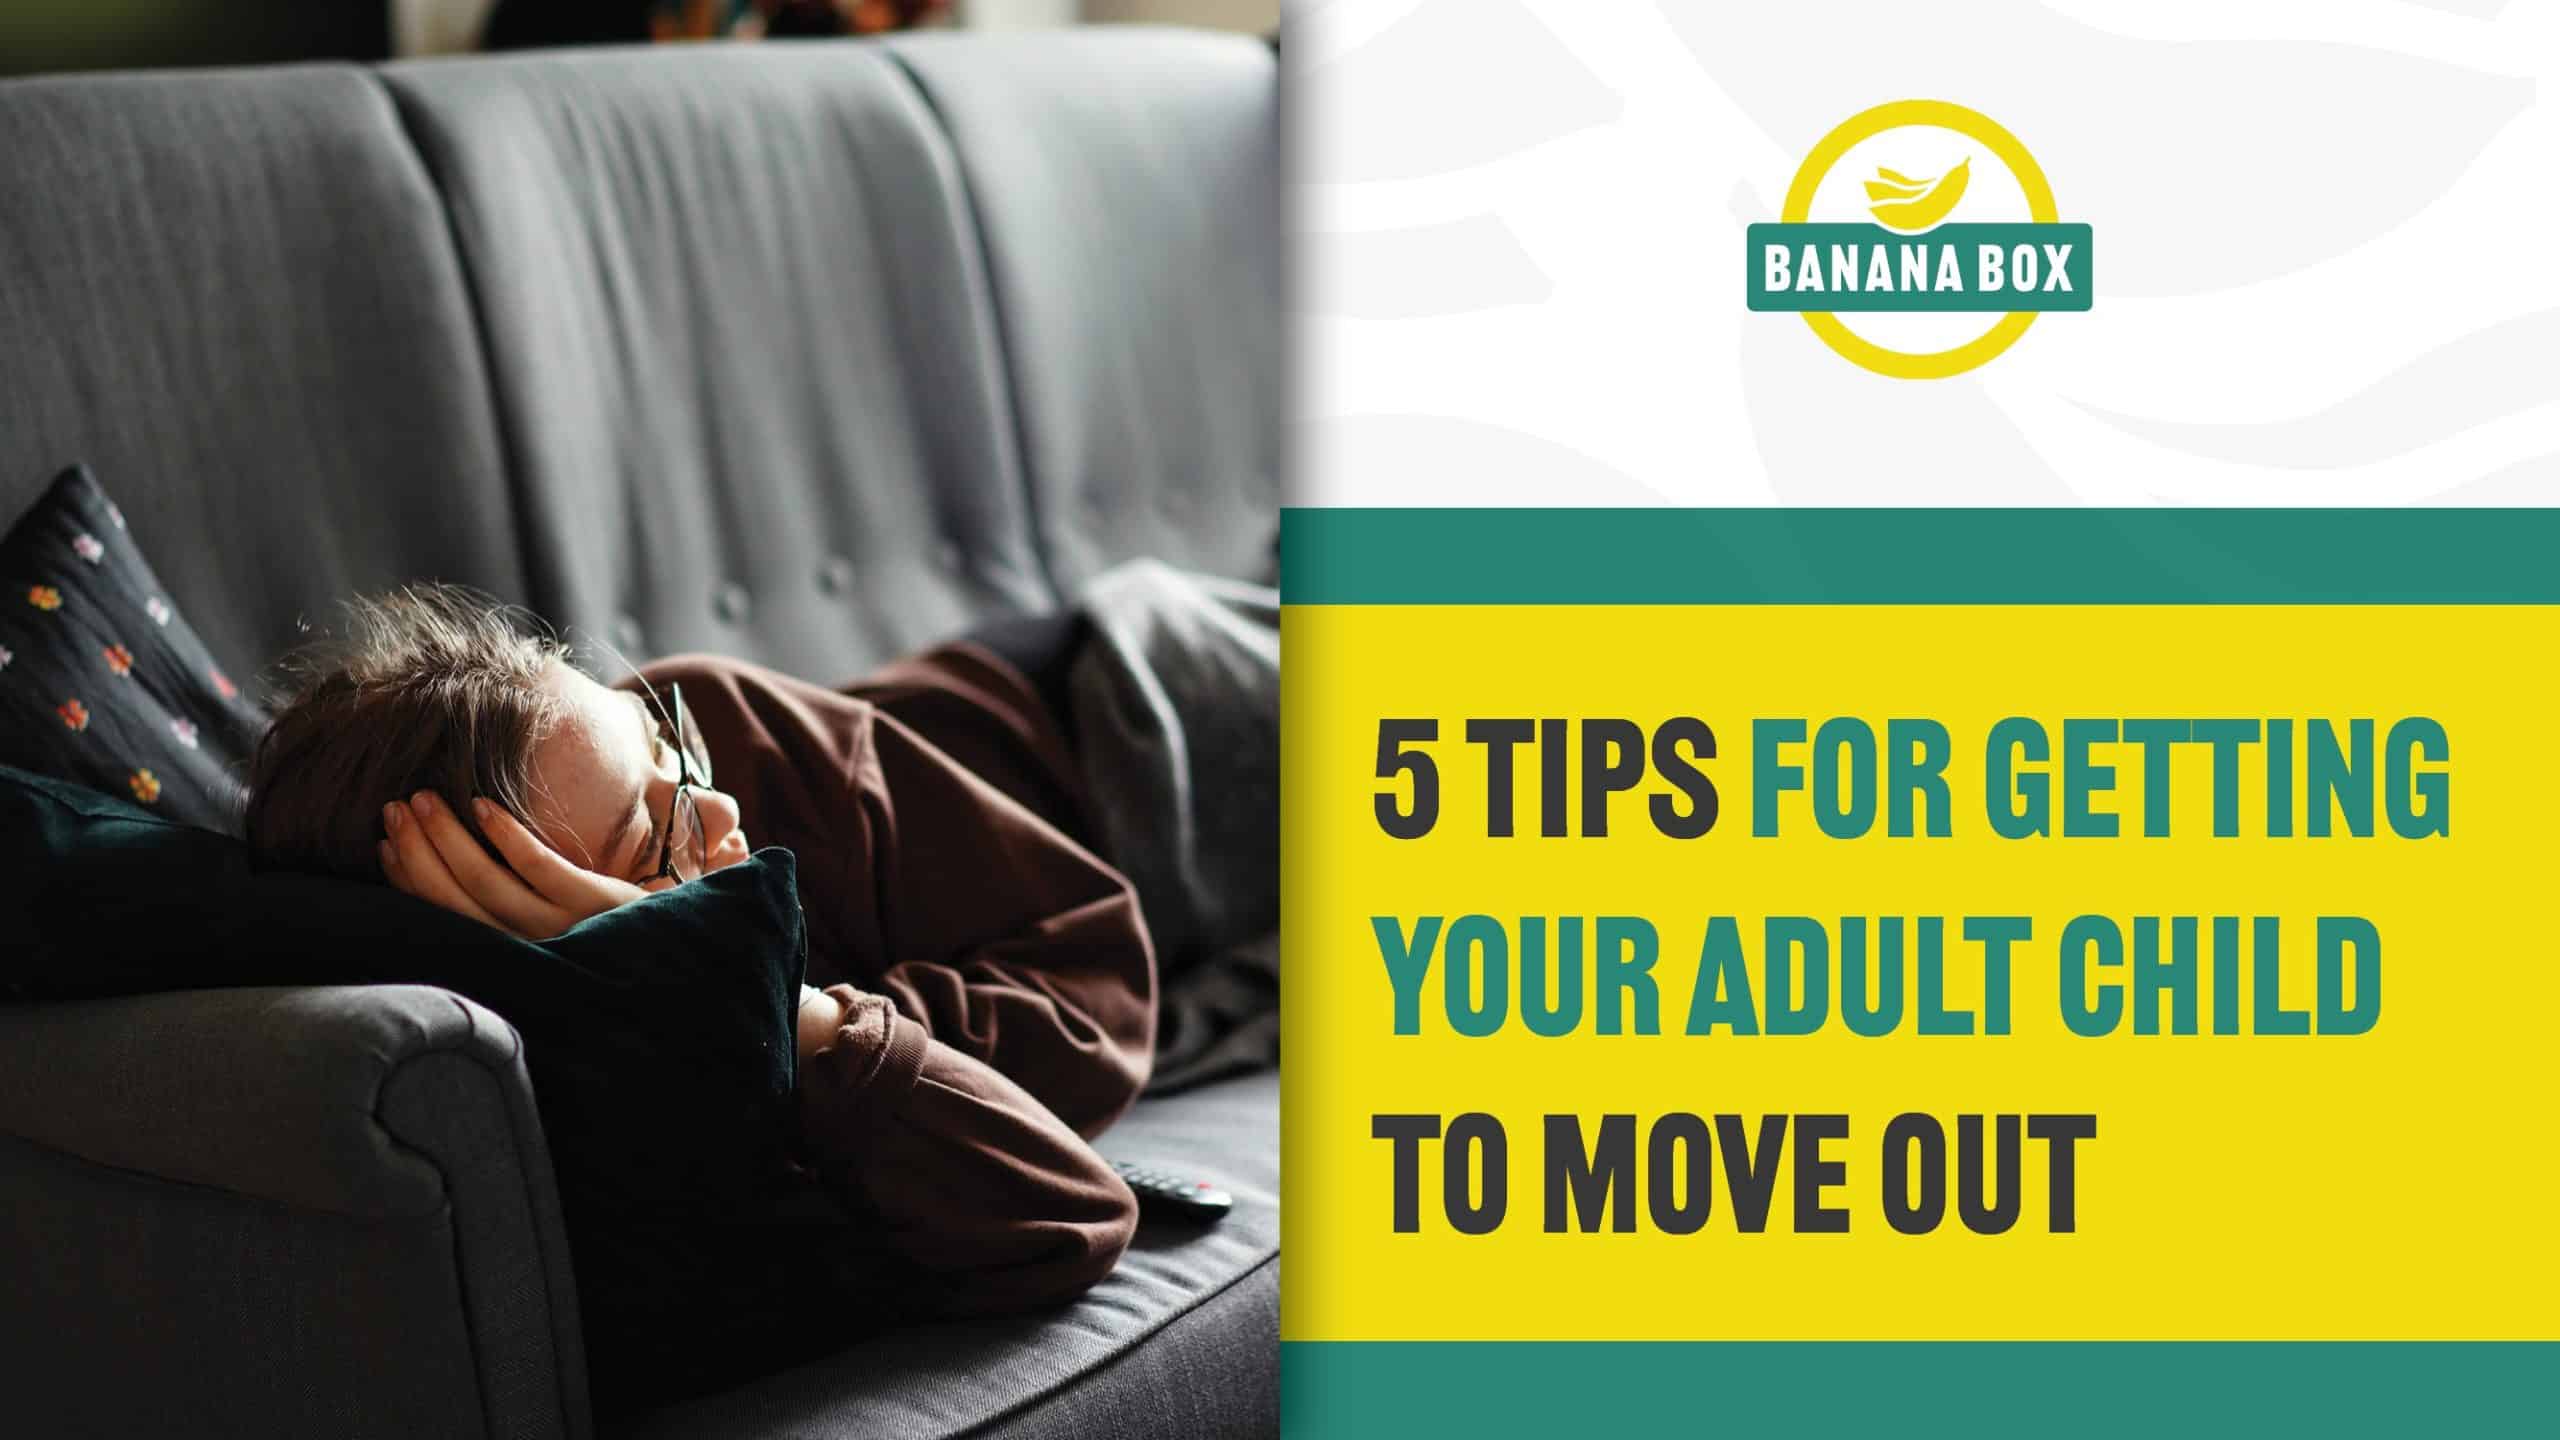 5 Tips For Getting Your Adult Child to Move Out